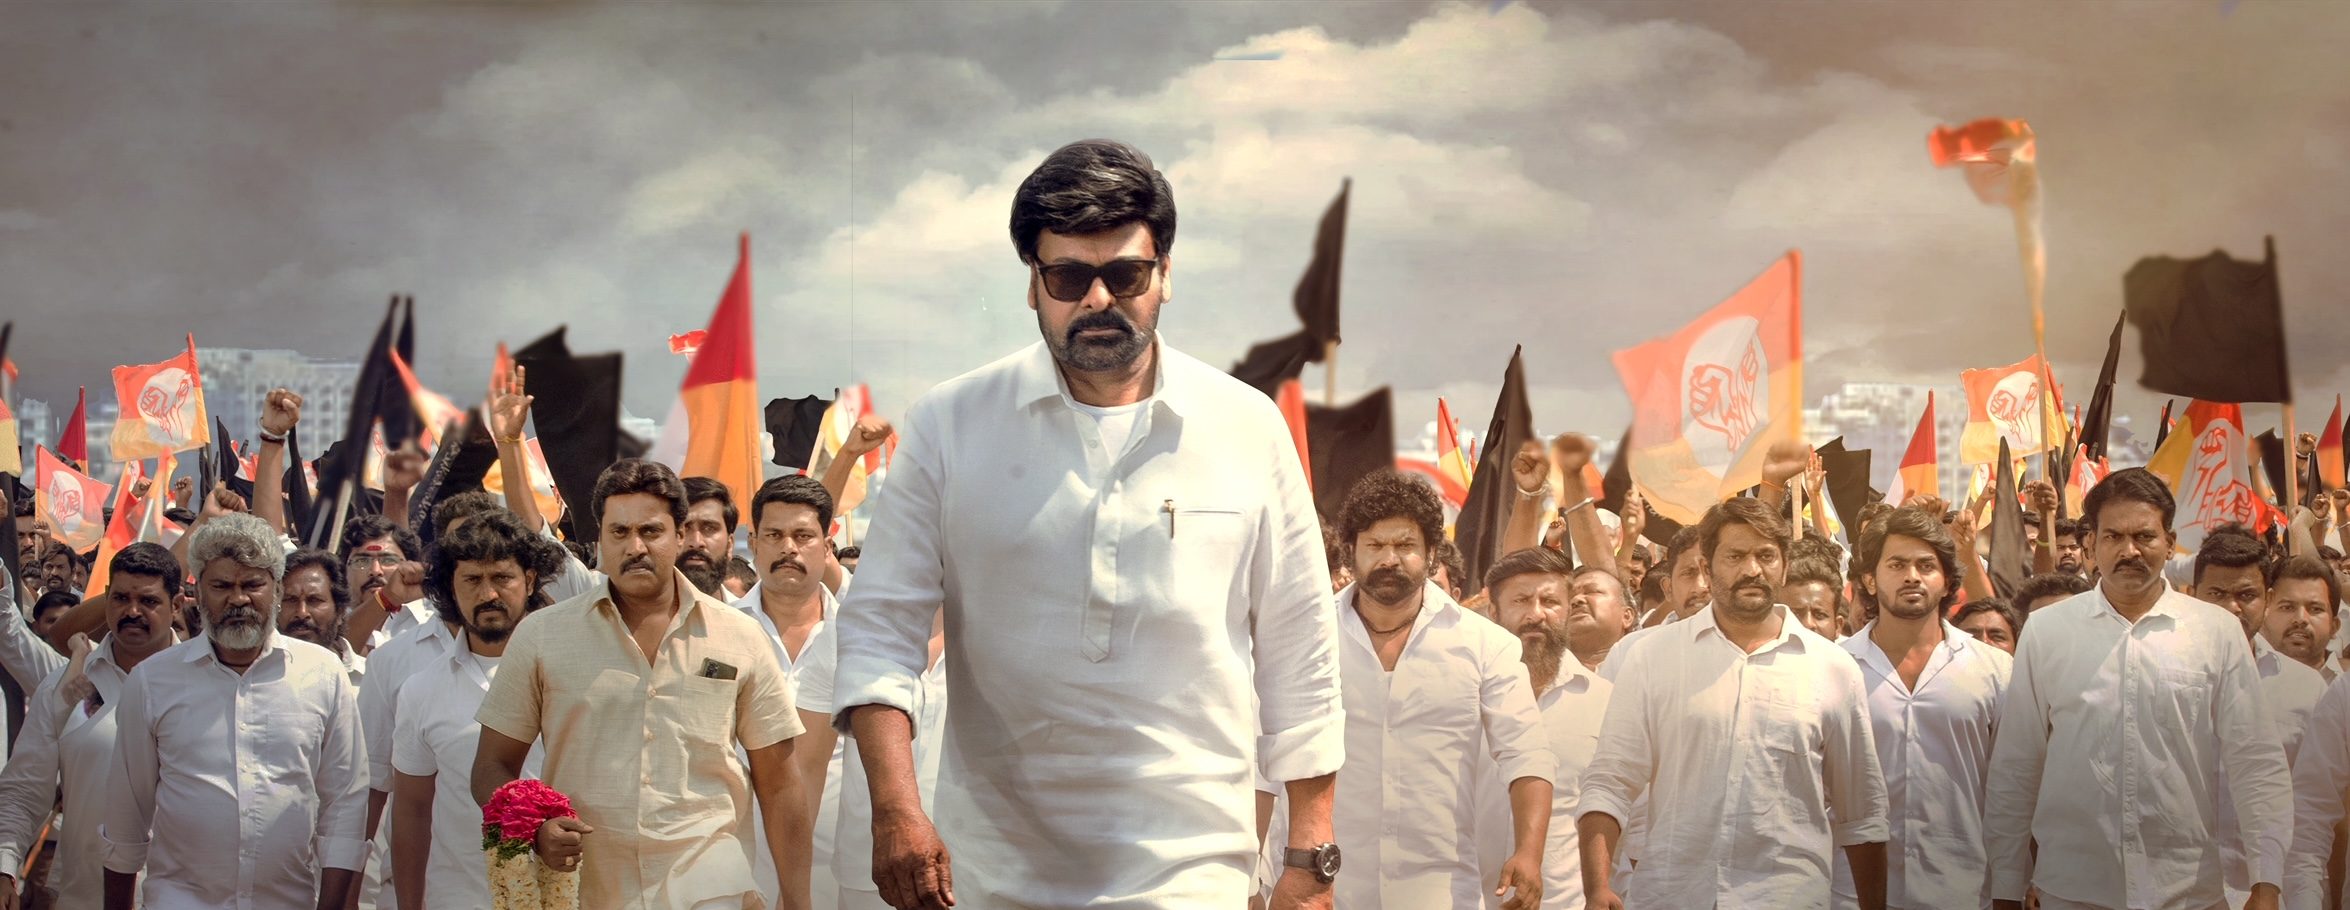 Godfather film review: An absolute entertainer from Chiranjeevi and Mohan Raja